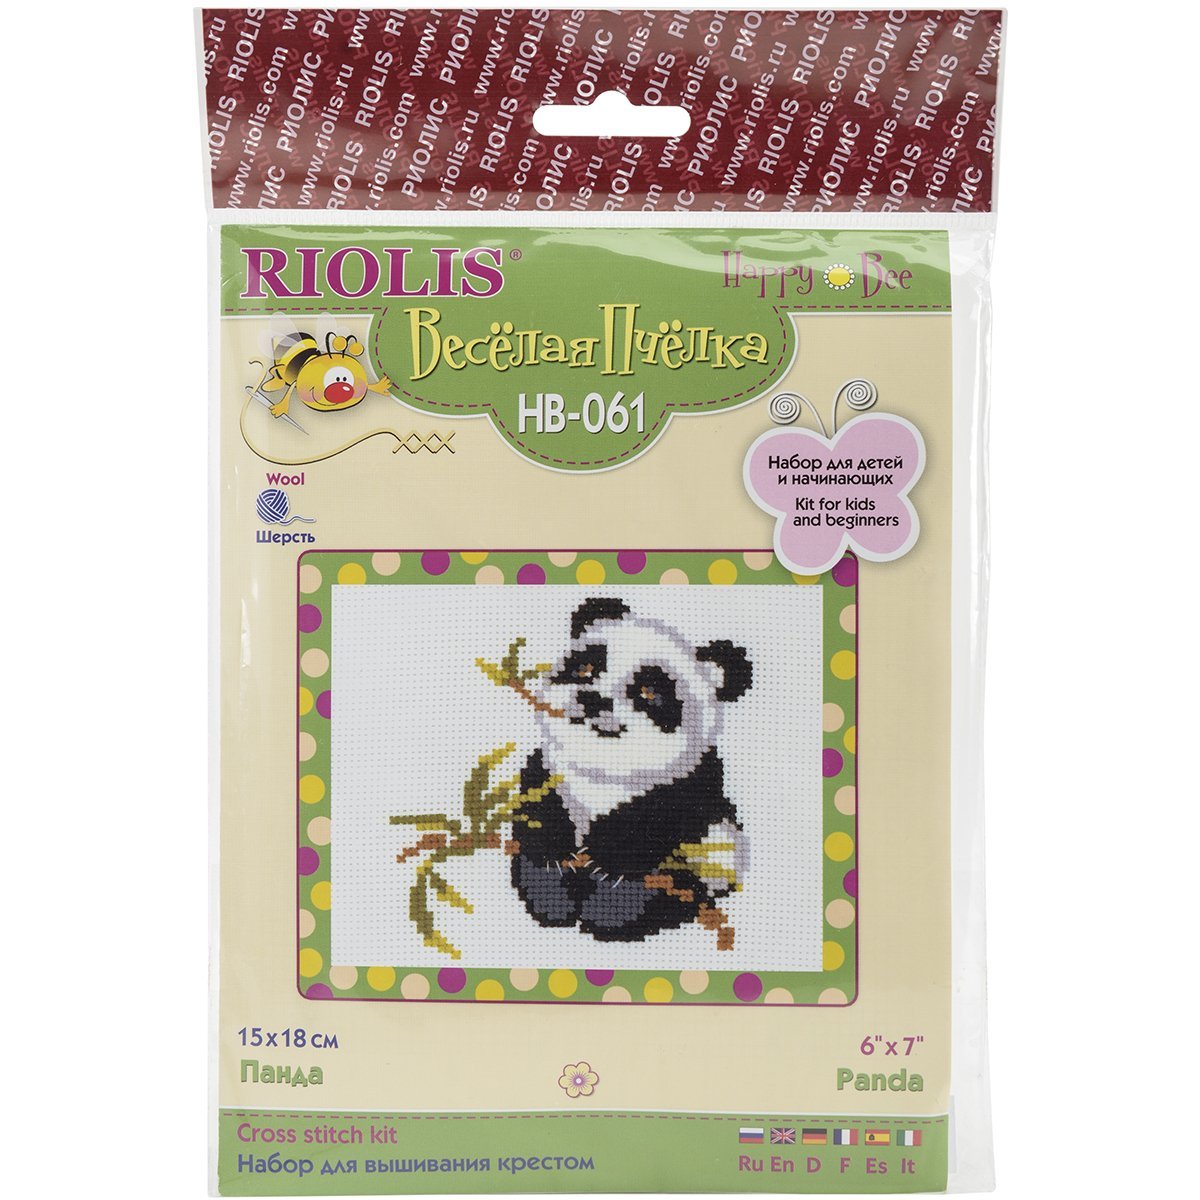 Rhb061 Panda Counted Cross Stitch Kit, 10 Count - 7 X 6 In.